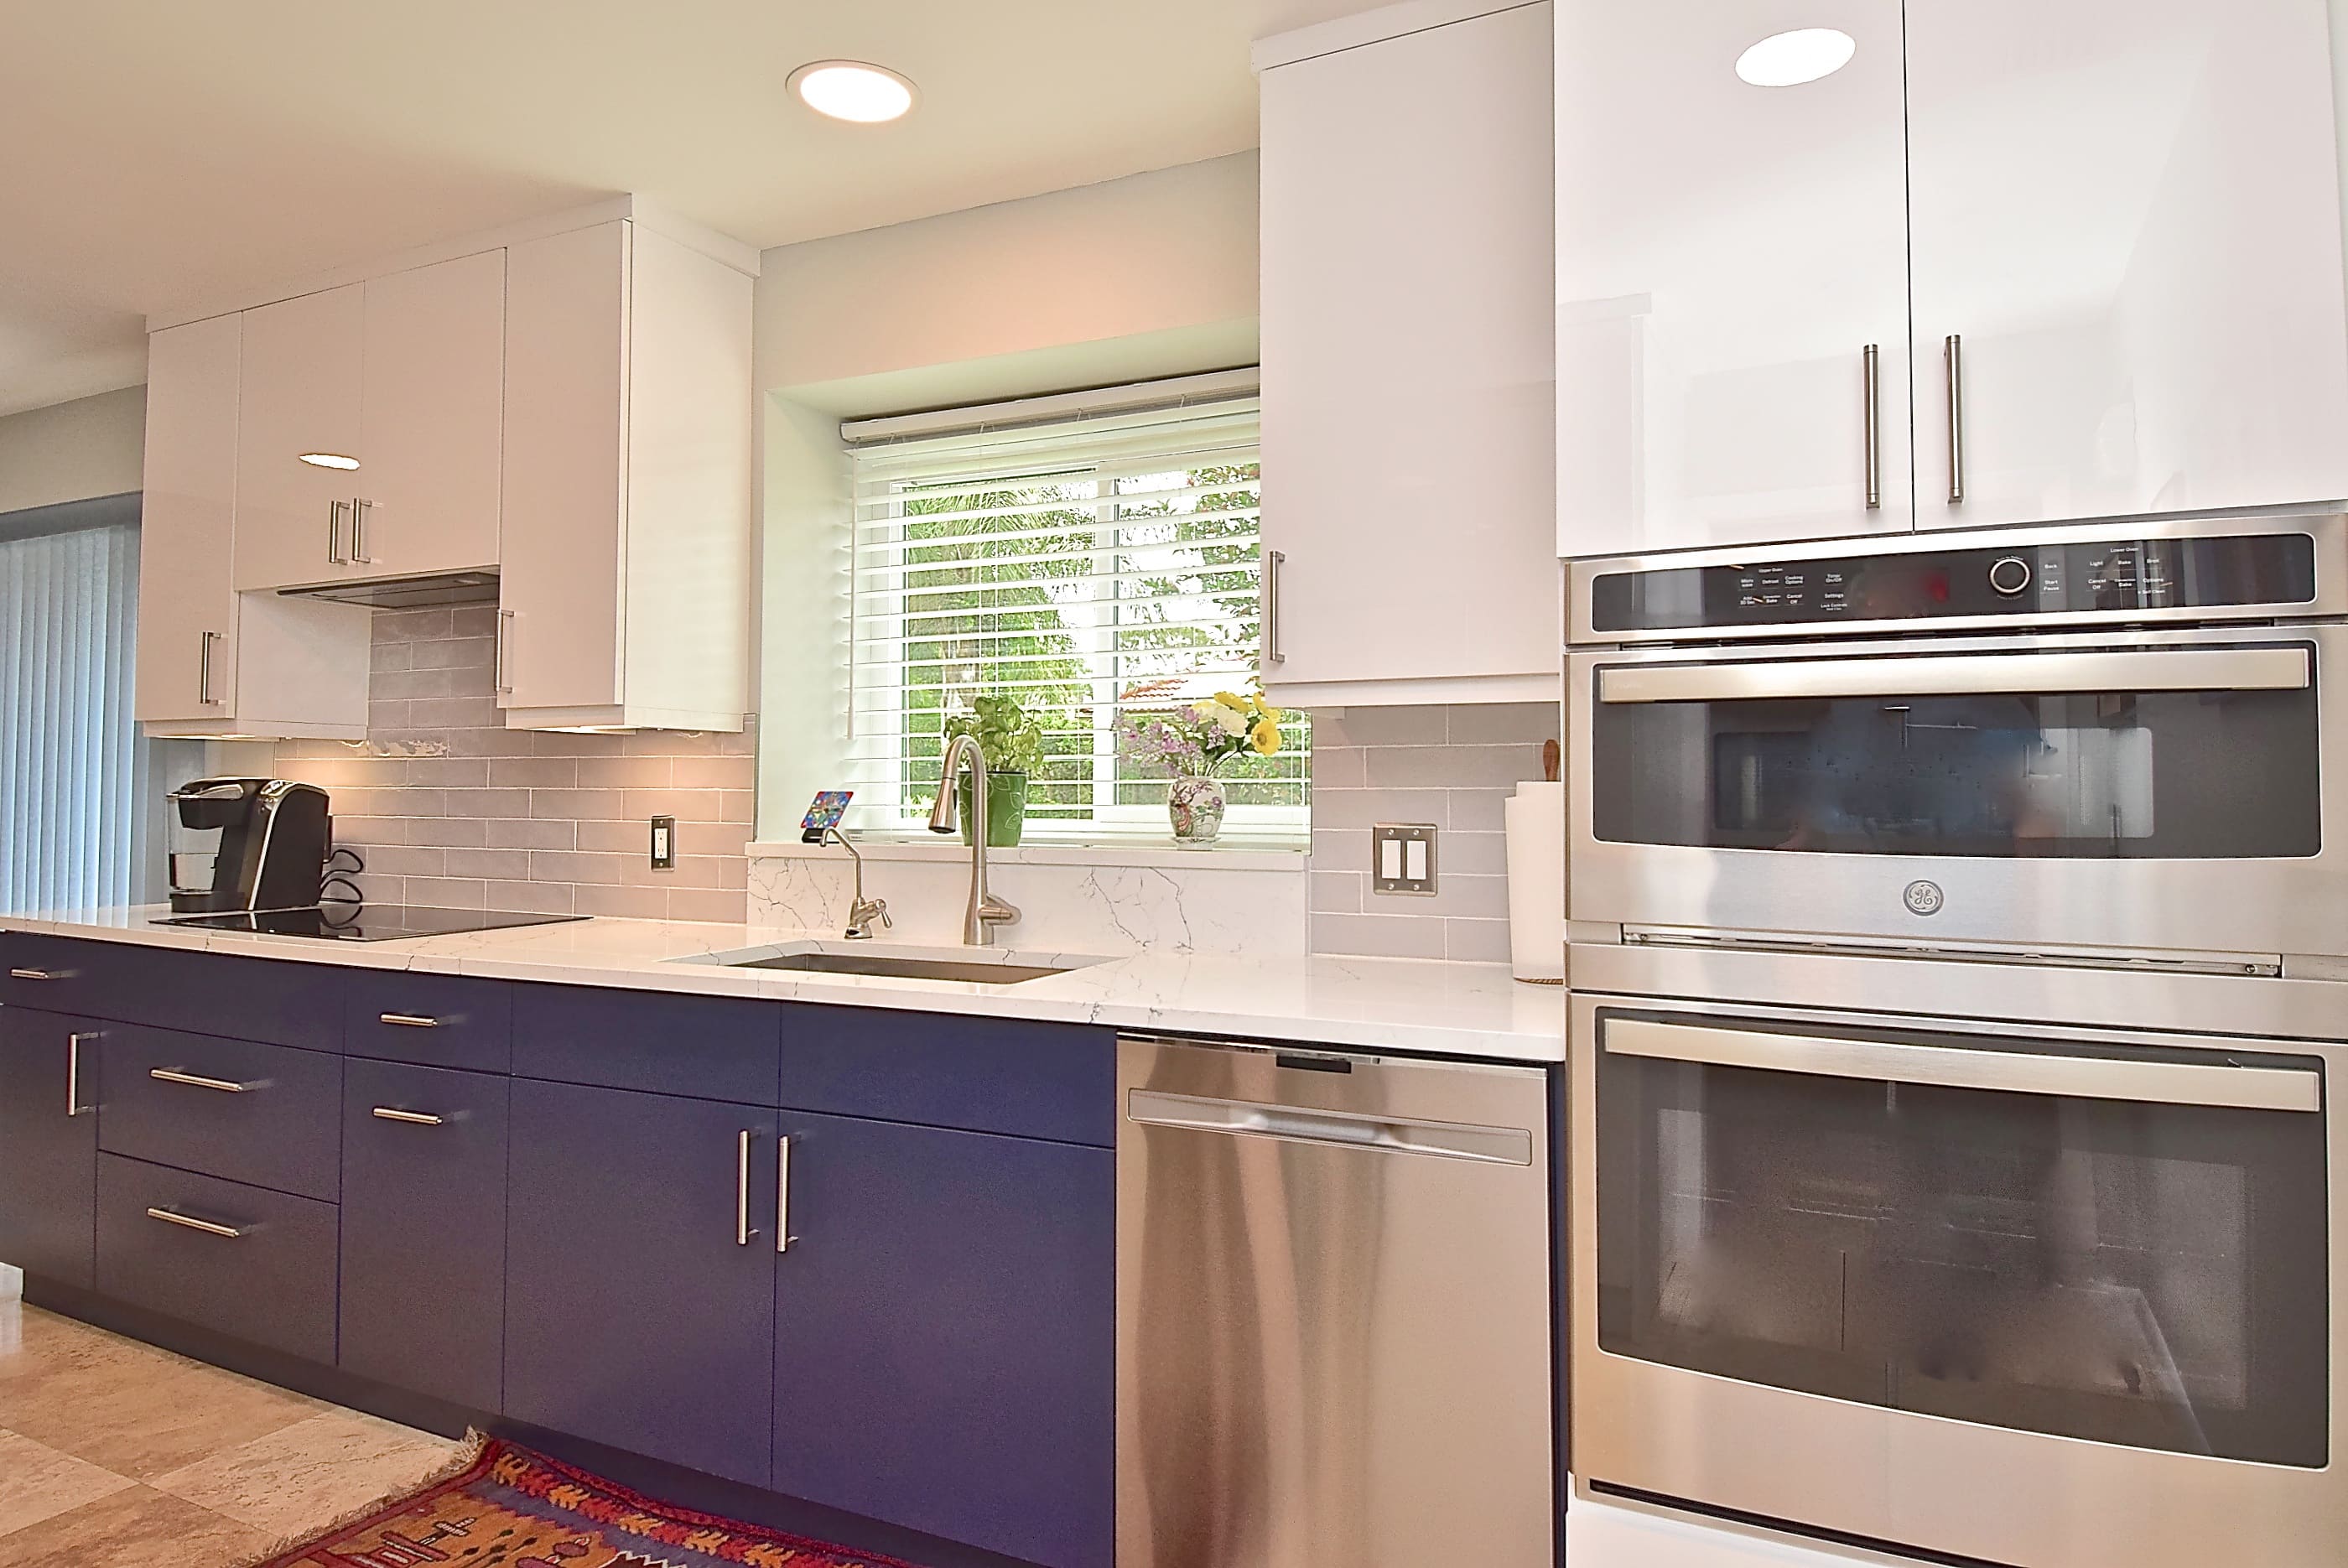 Built In Stainless Steel Appliances in Remodeled Sarasota Kitchen